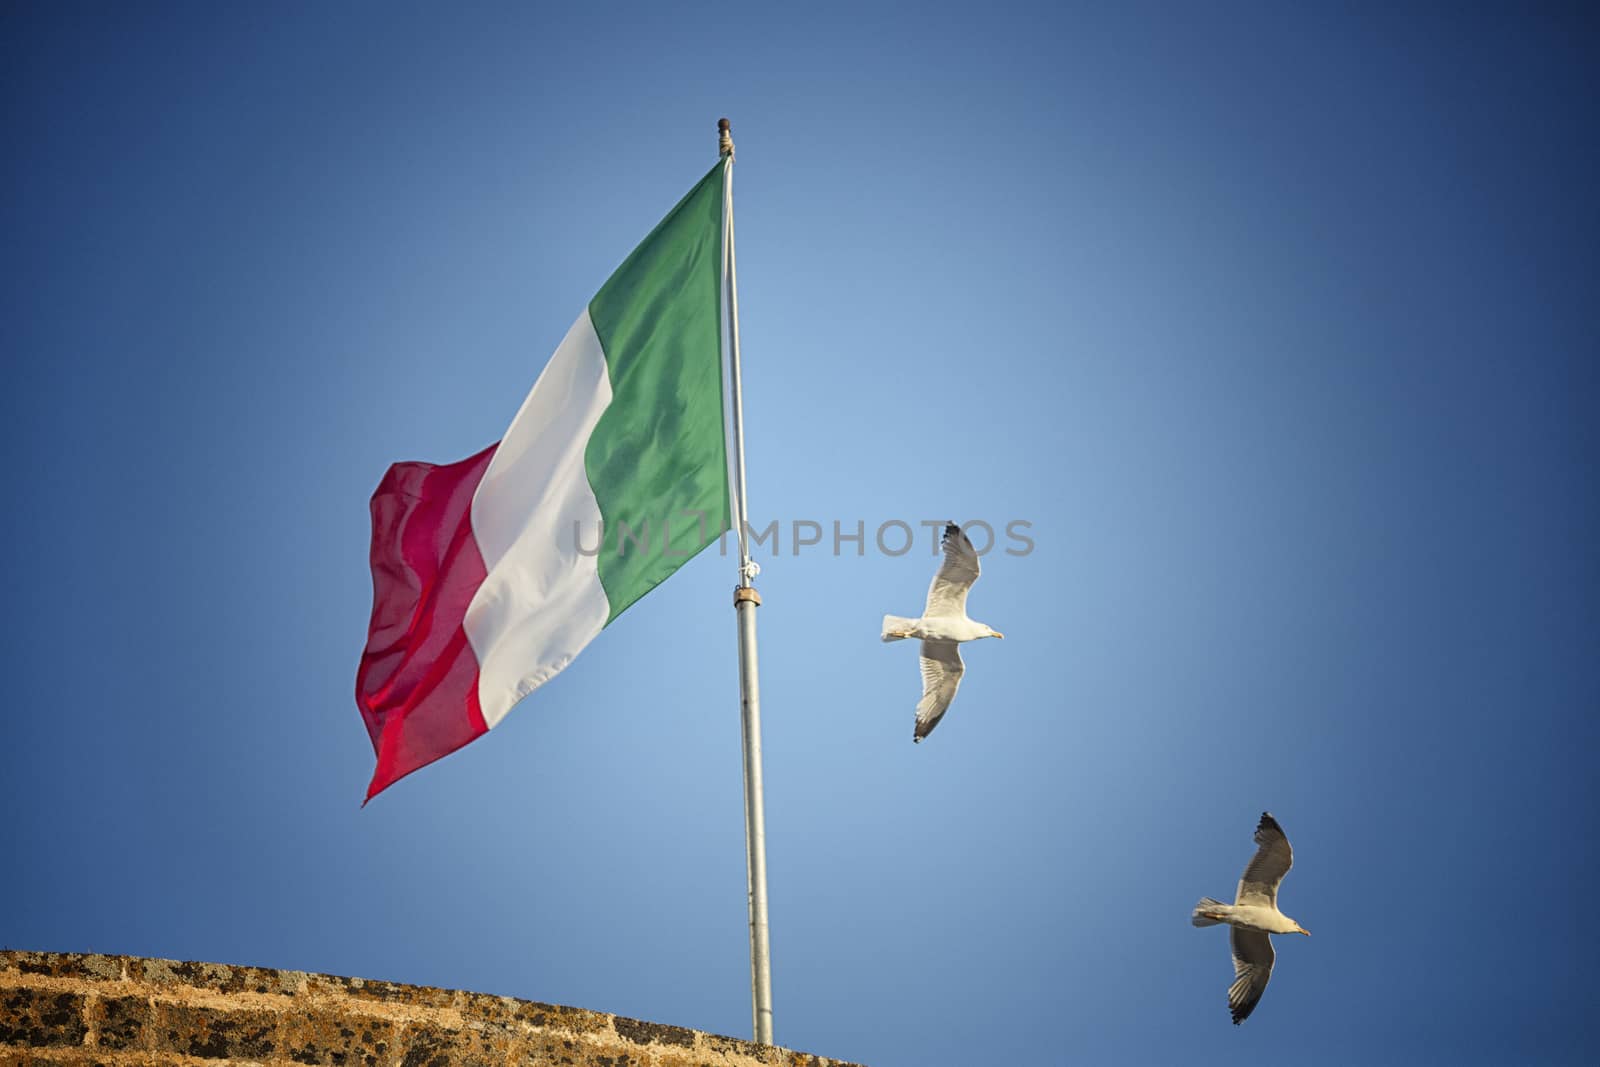 Seagulls (Larinae Rafinesque) flying near Italian flag blowing in the wind: red, white and green